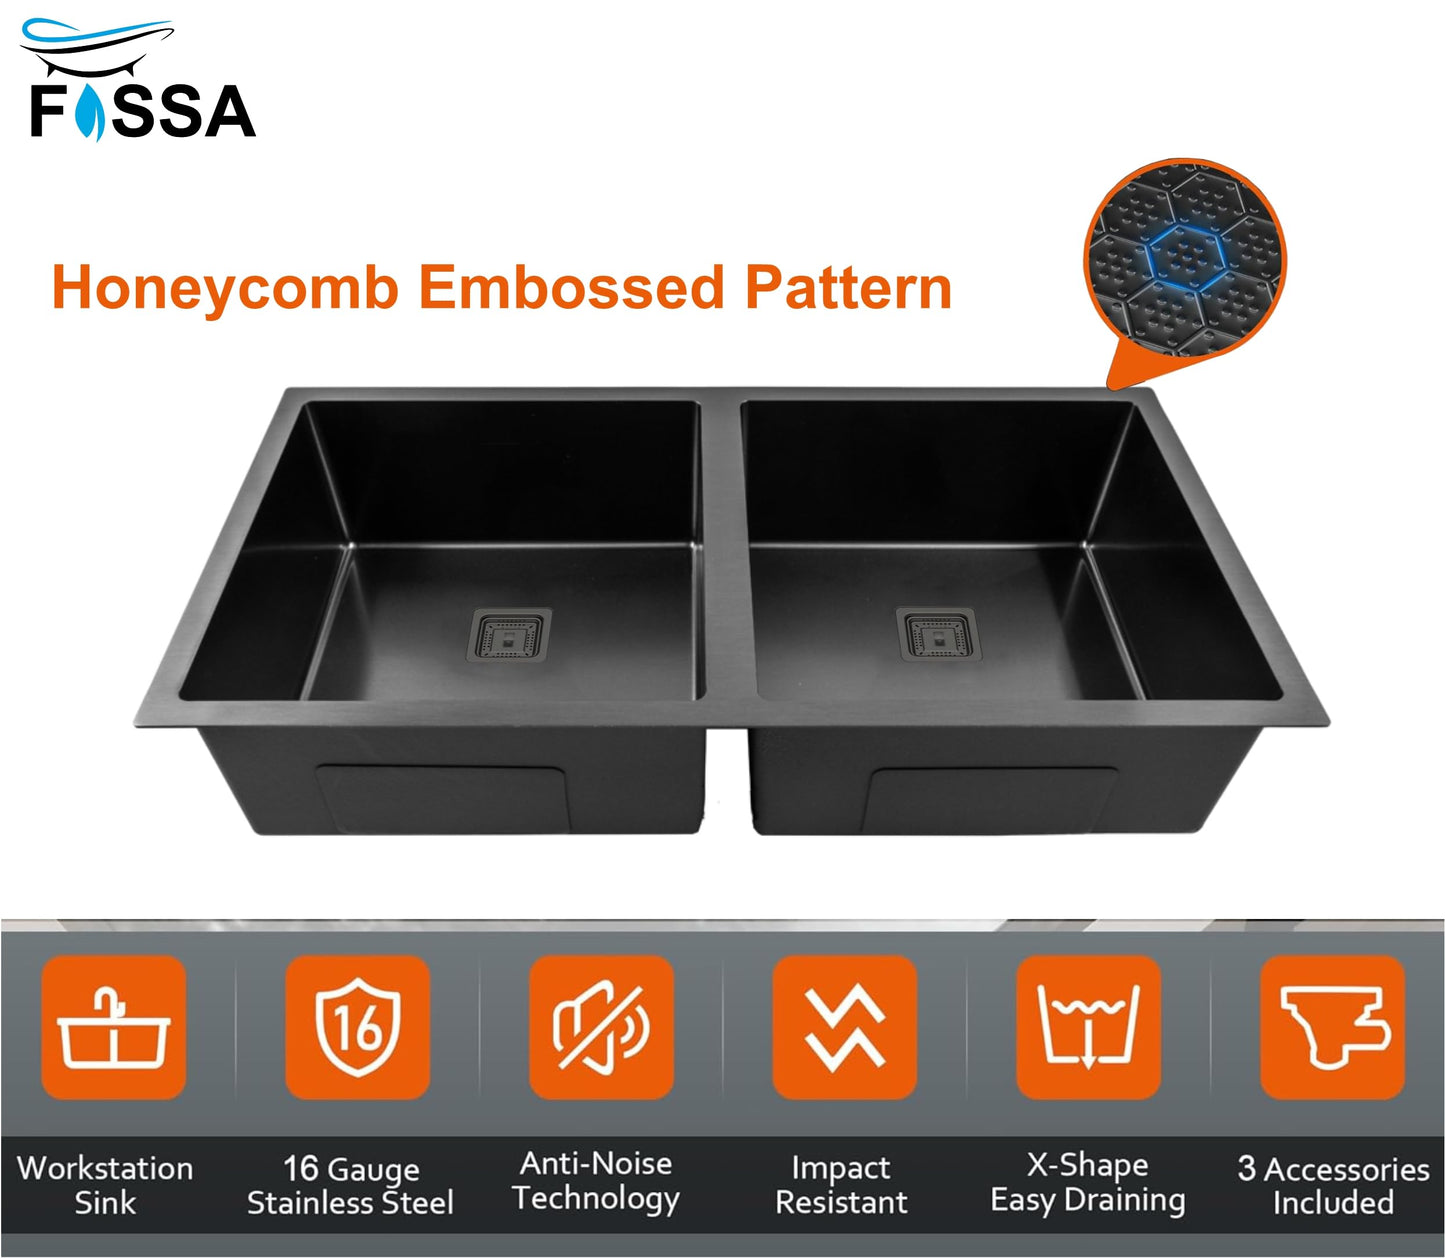 Fossa 45"x20"x10" Double Bowl Handmade Kitchen Sink Honeycomb Embossed Sink with Black Nano Coating, Stainless Steel Sink, Rectangular Workstation with Drainer and Overflow Set (Black)